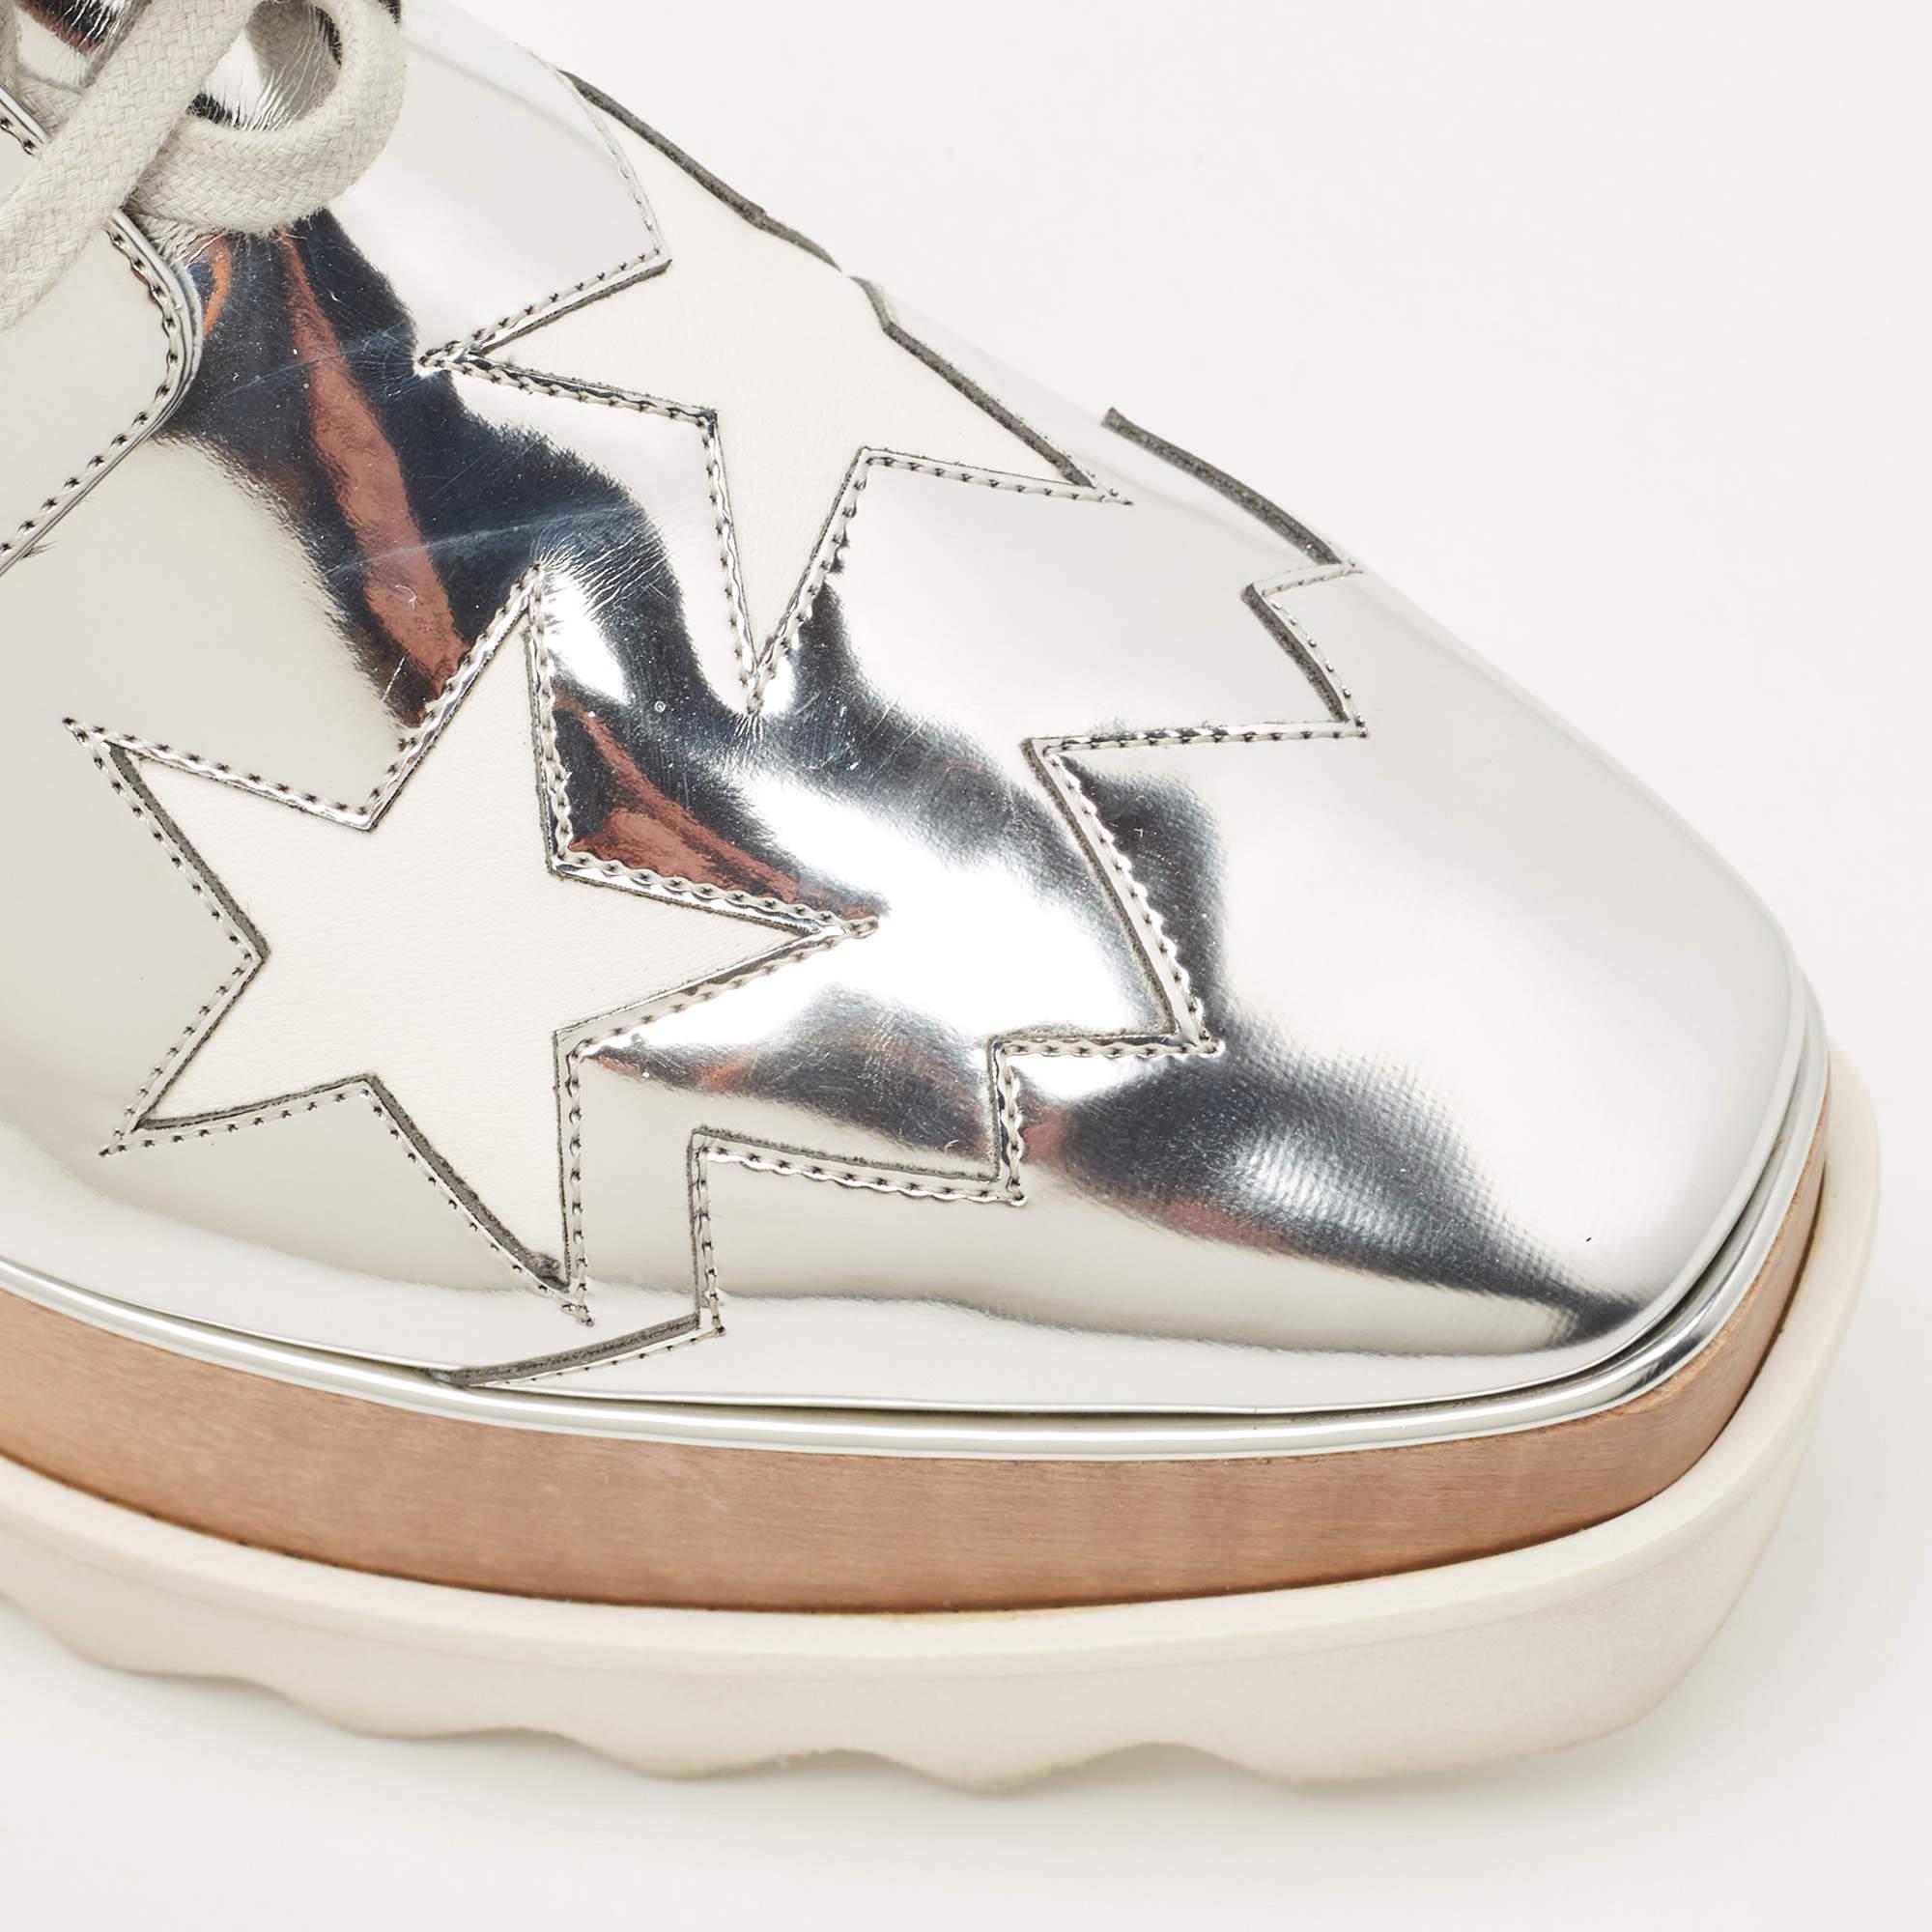 Stella McCartney Silver Faux Leather Elyse Star Wedge Sneakers Size 38 1